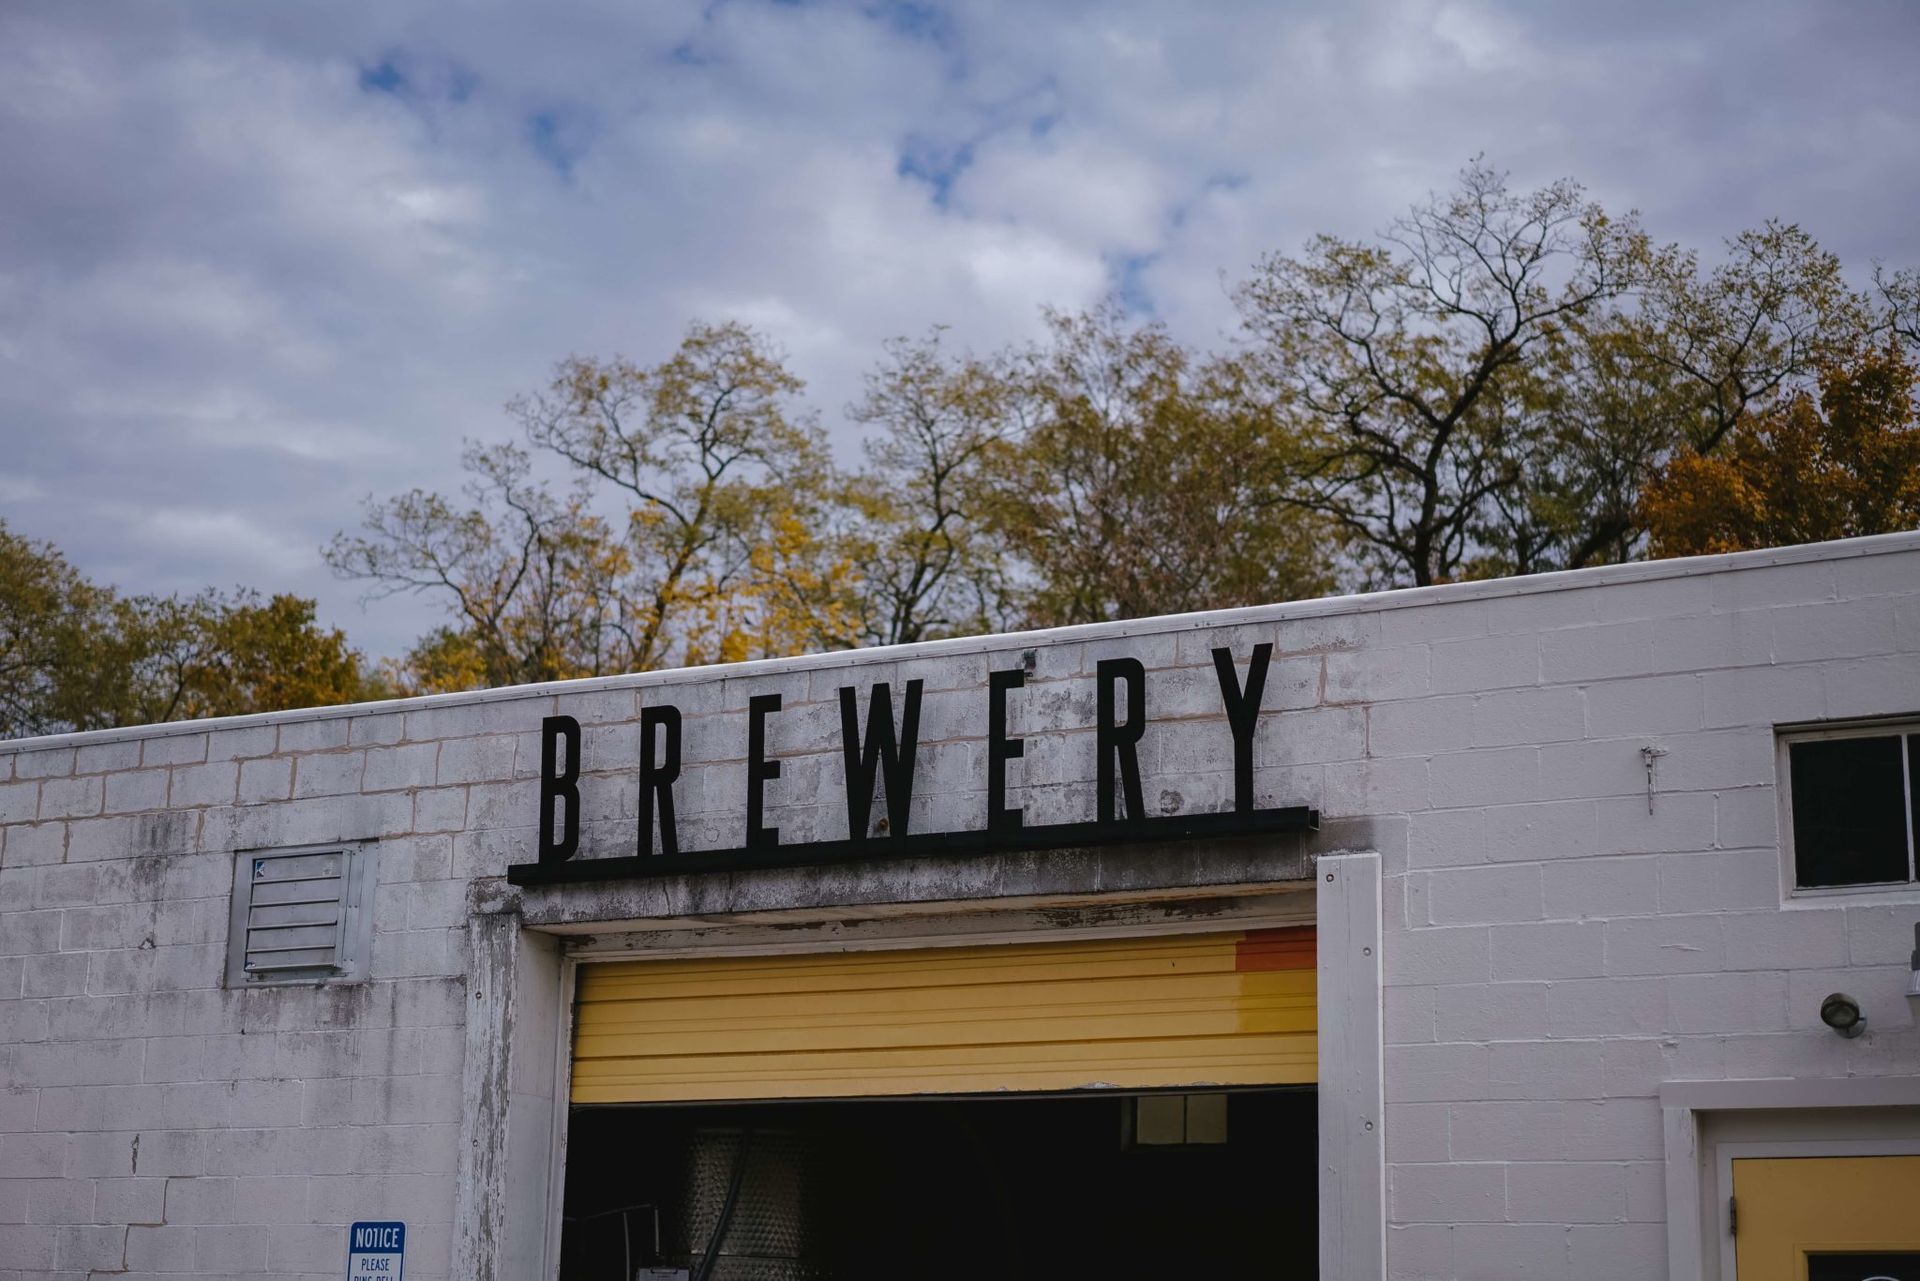 A white brick building with a brewery sign on it.